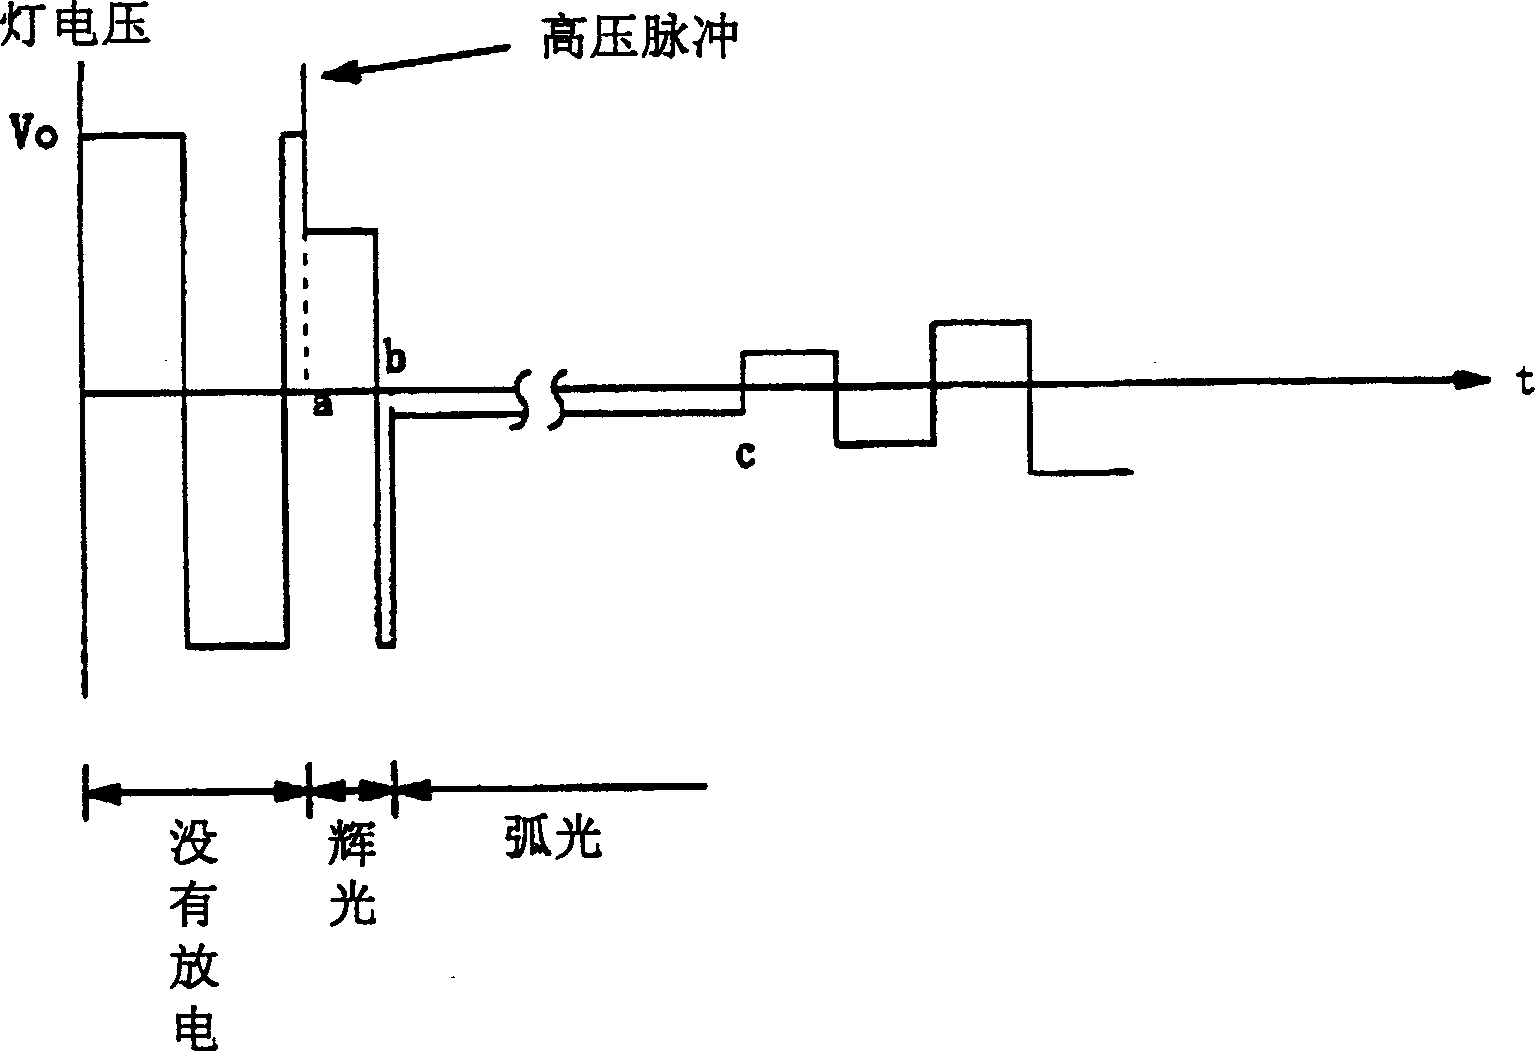 Lighting device for high-pressure discharge lamp